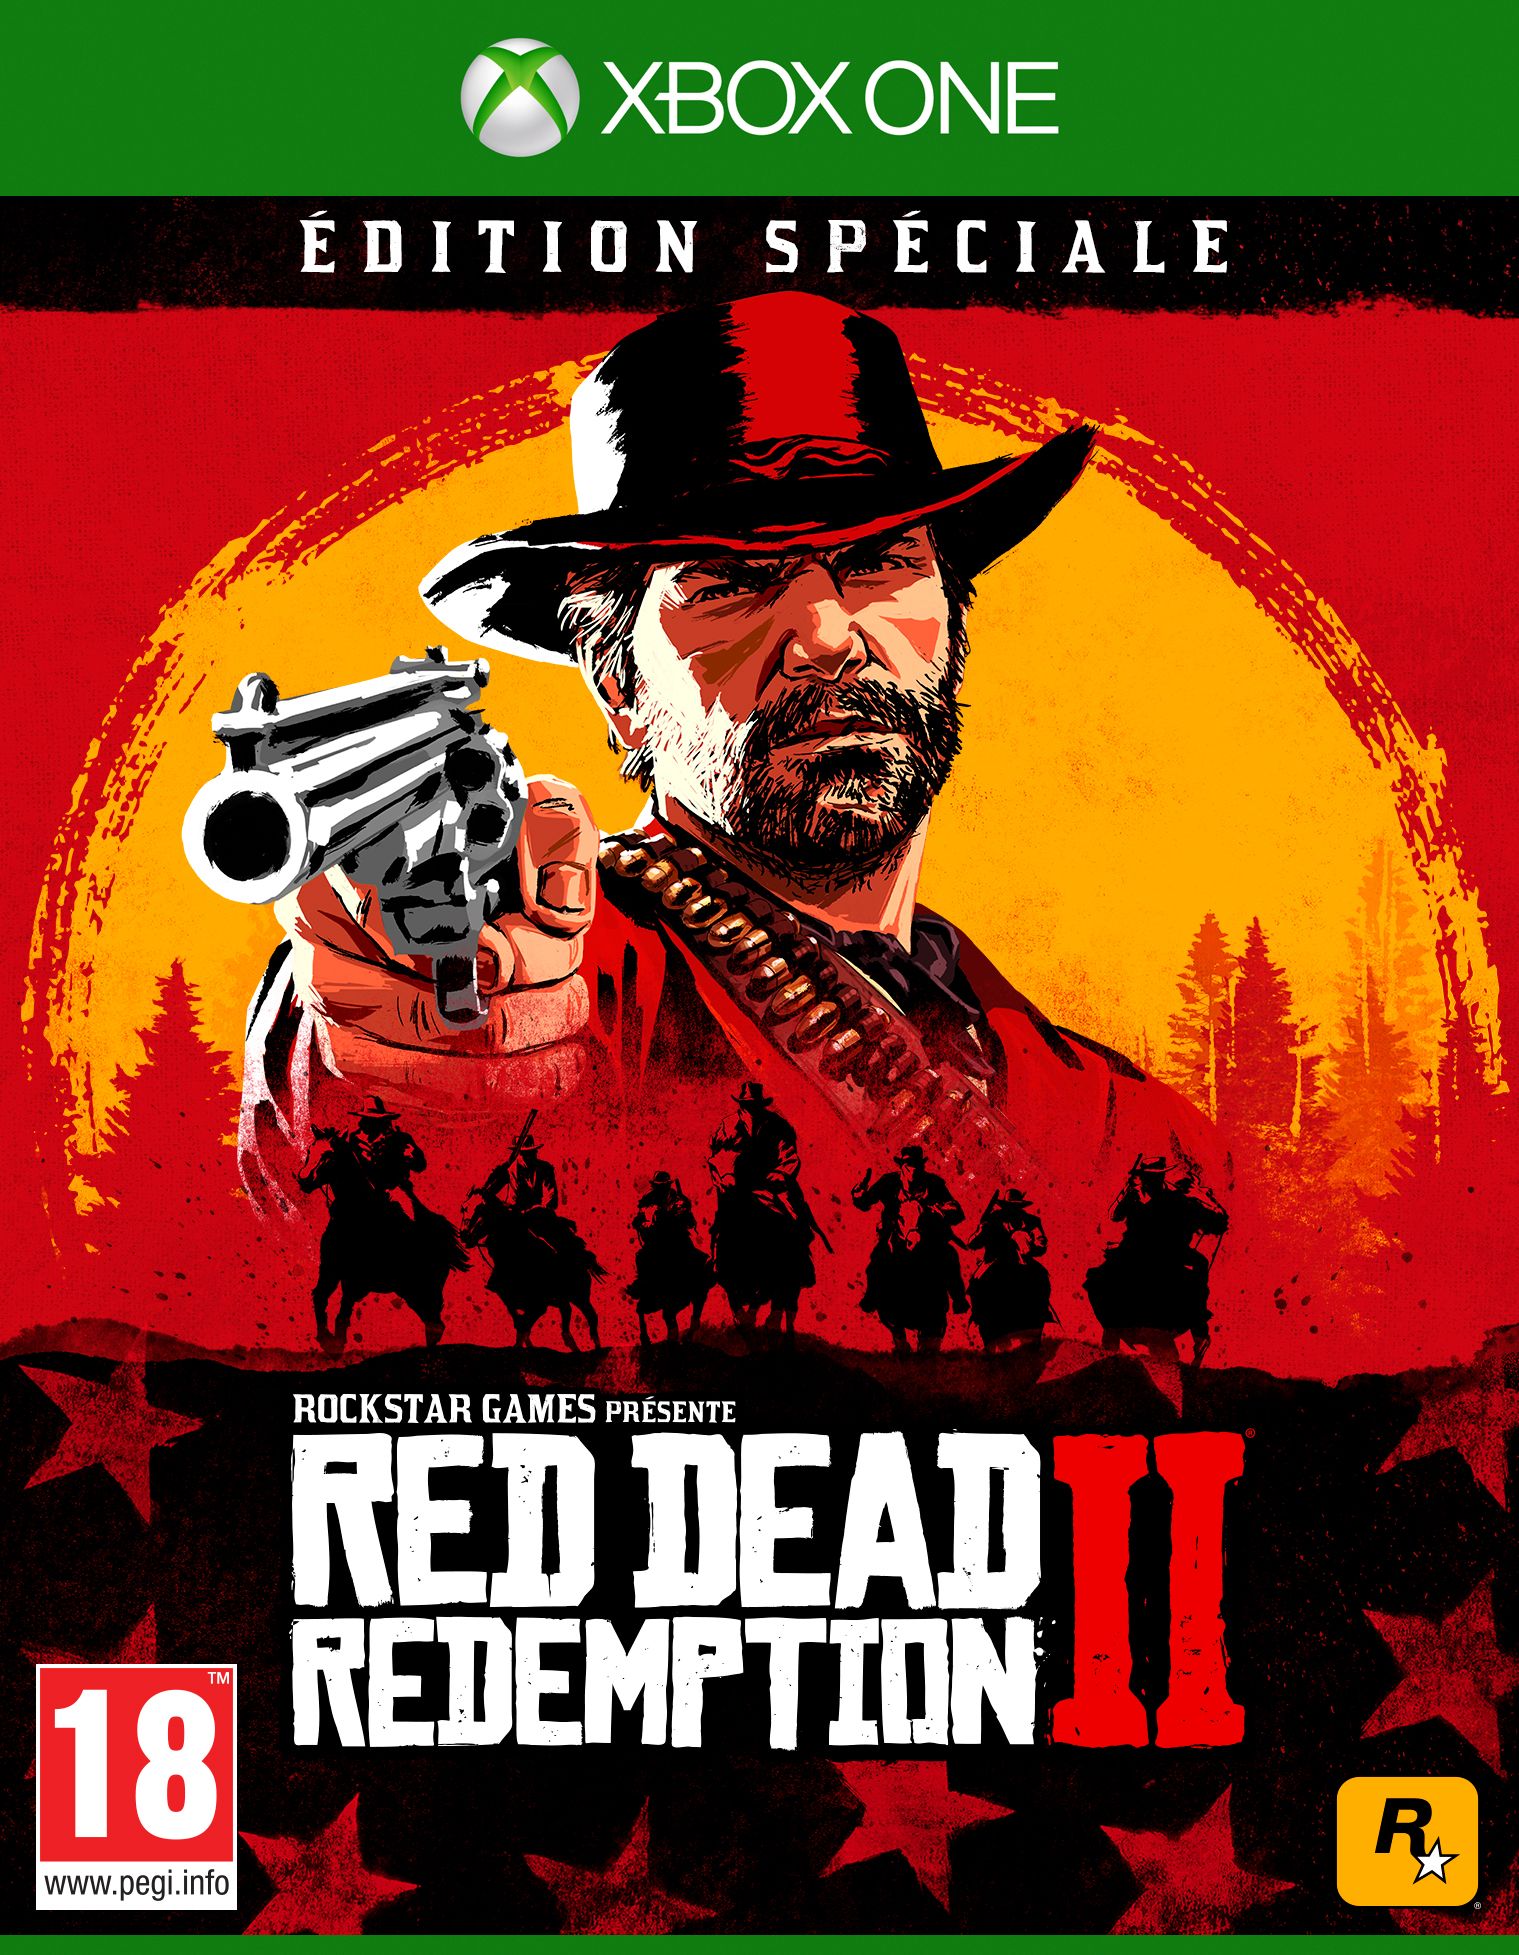 Red Dead Redemption 2 Special Edition